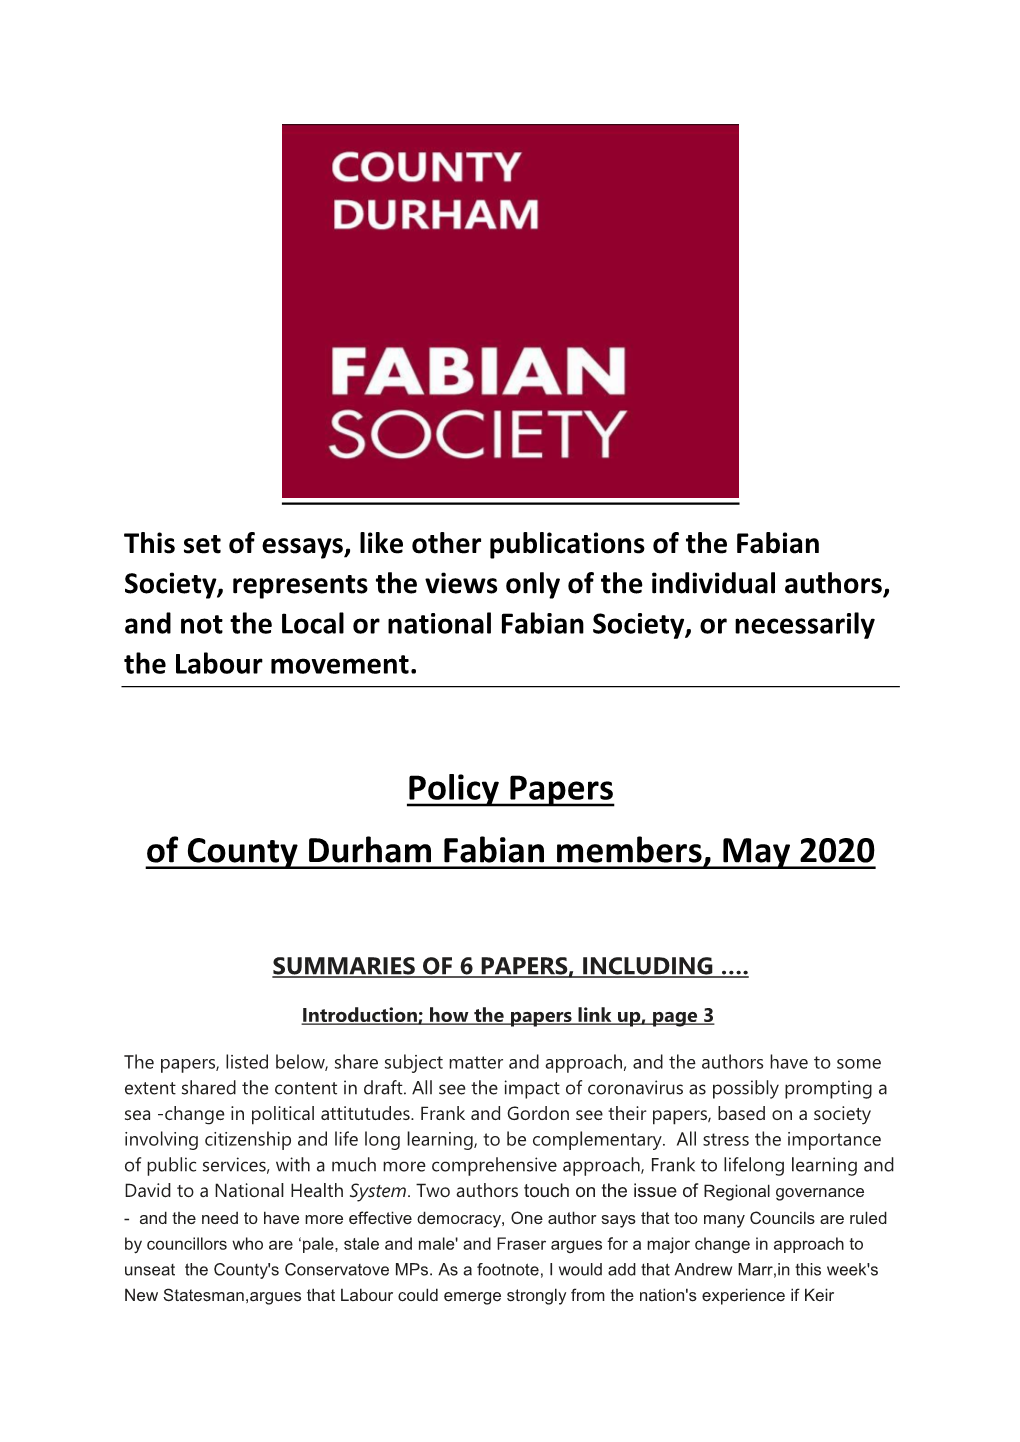 Policy Papers of County Durham Fabian Members, May 2020